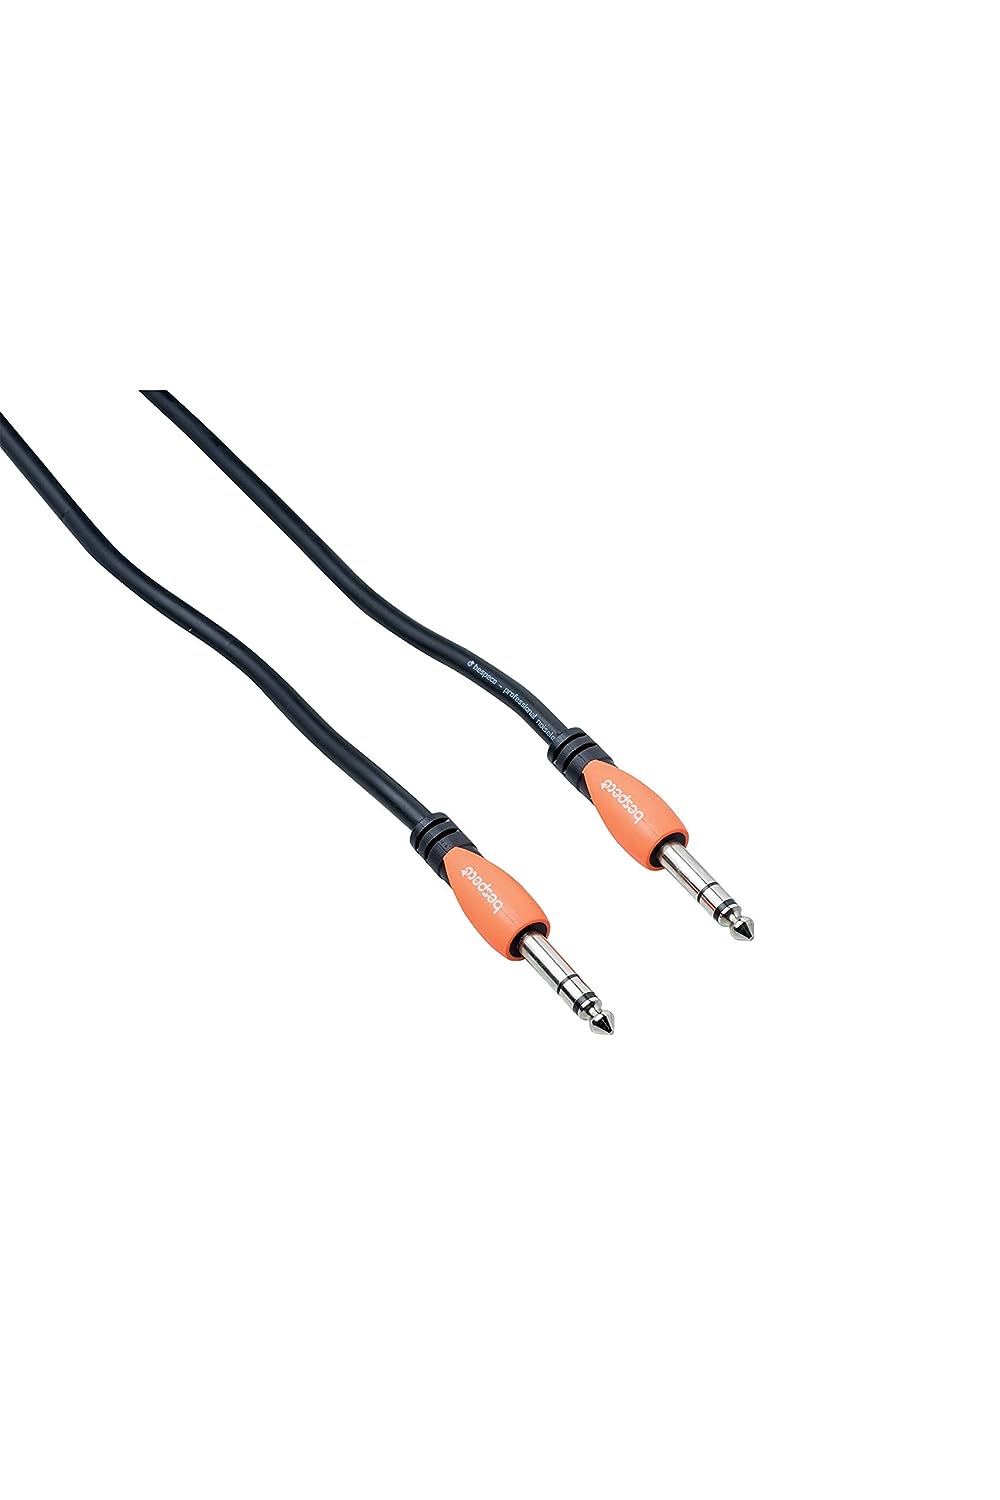 Bespeco SLSS100 Patch Cable - 1m